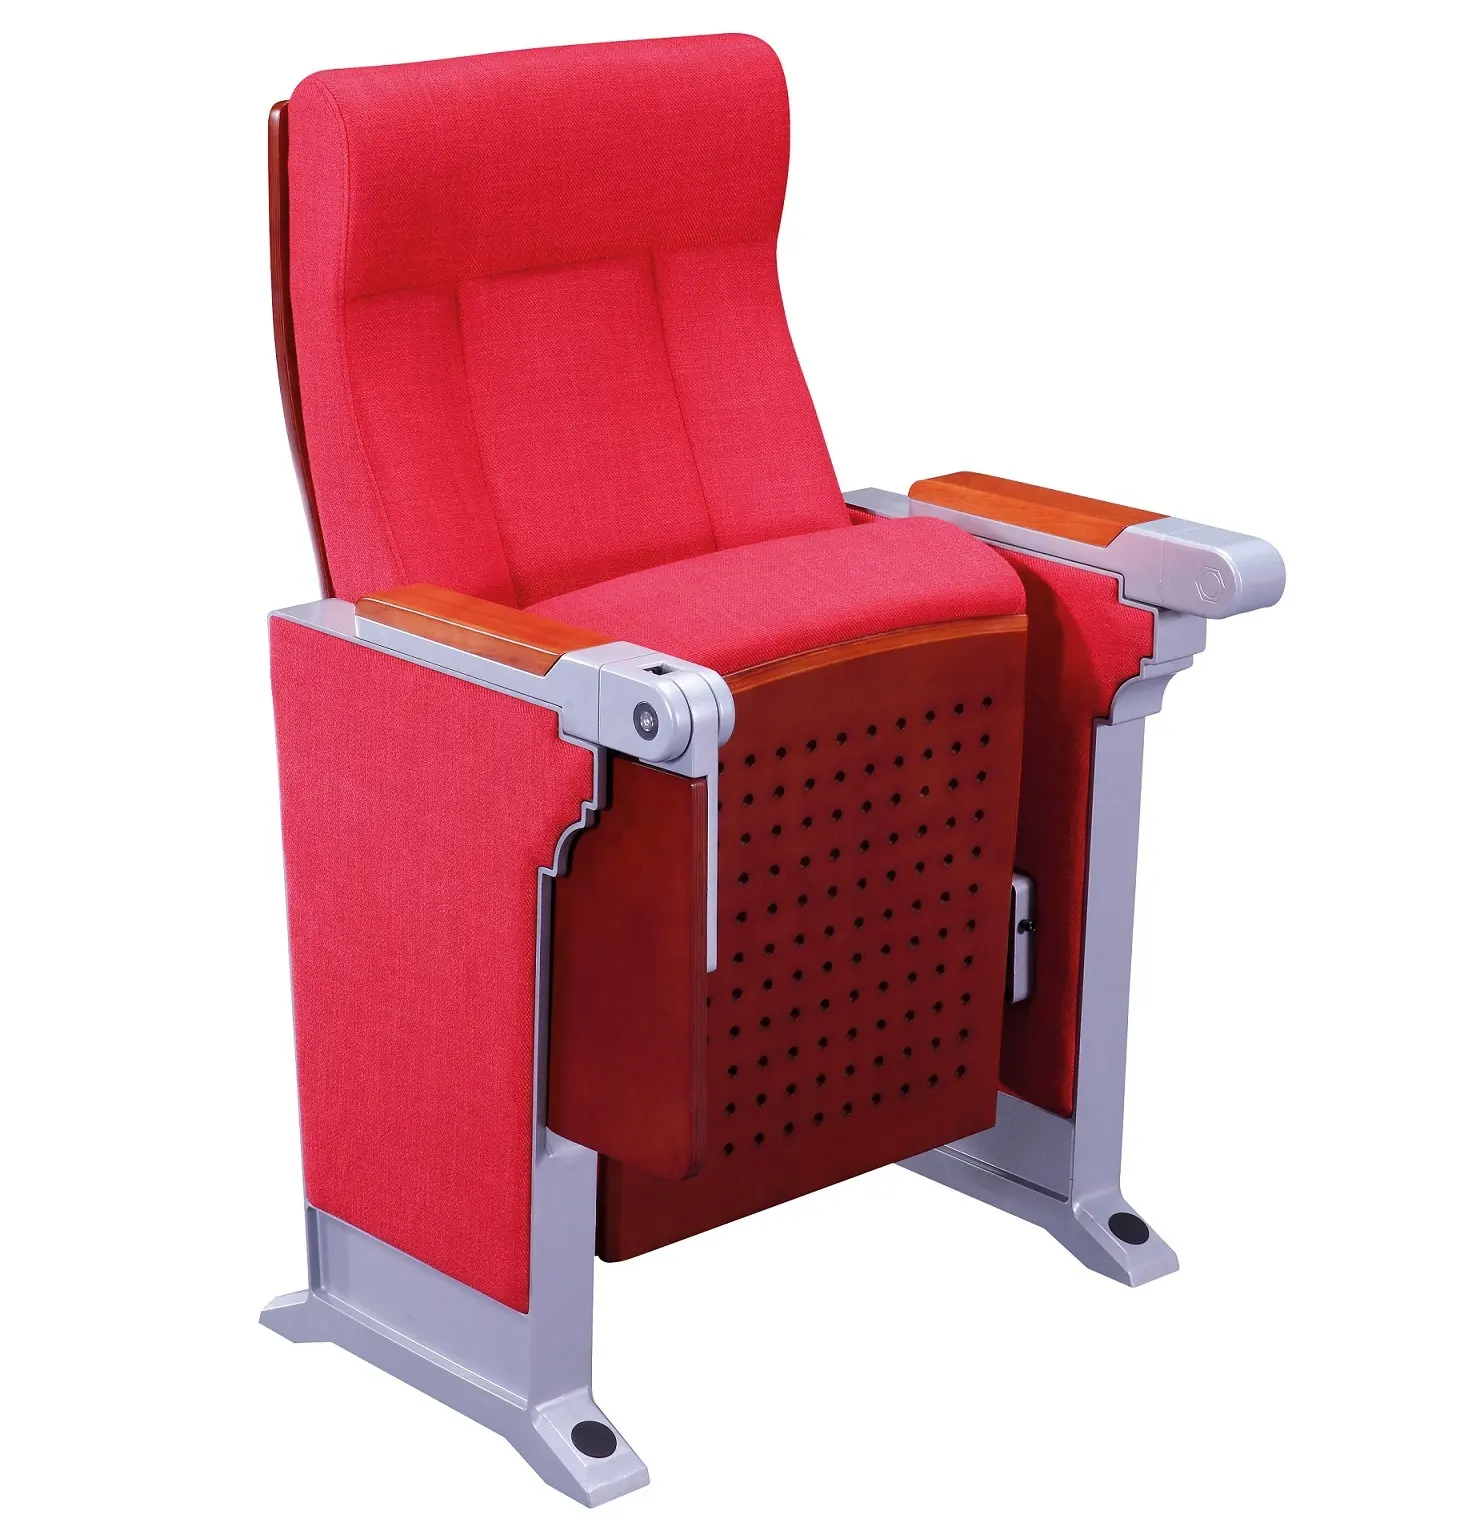 Luxury aluminium alloy auditorium chair theater seat with USB charger for school and lecture hall